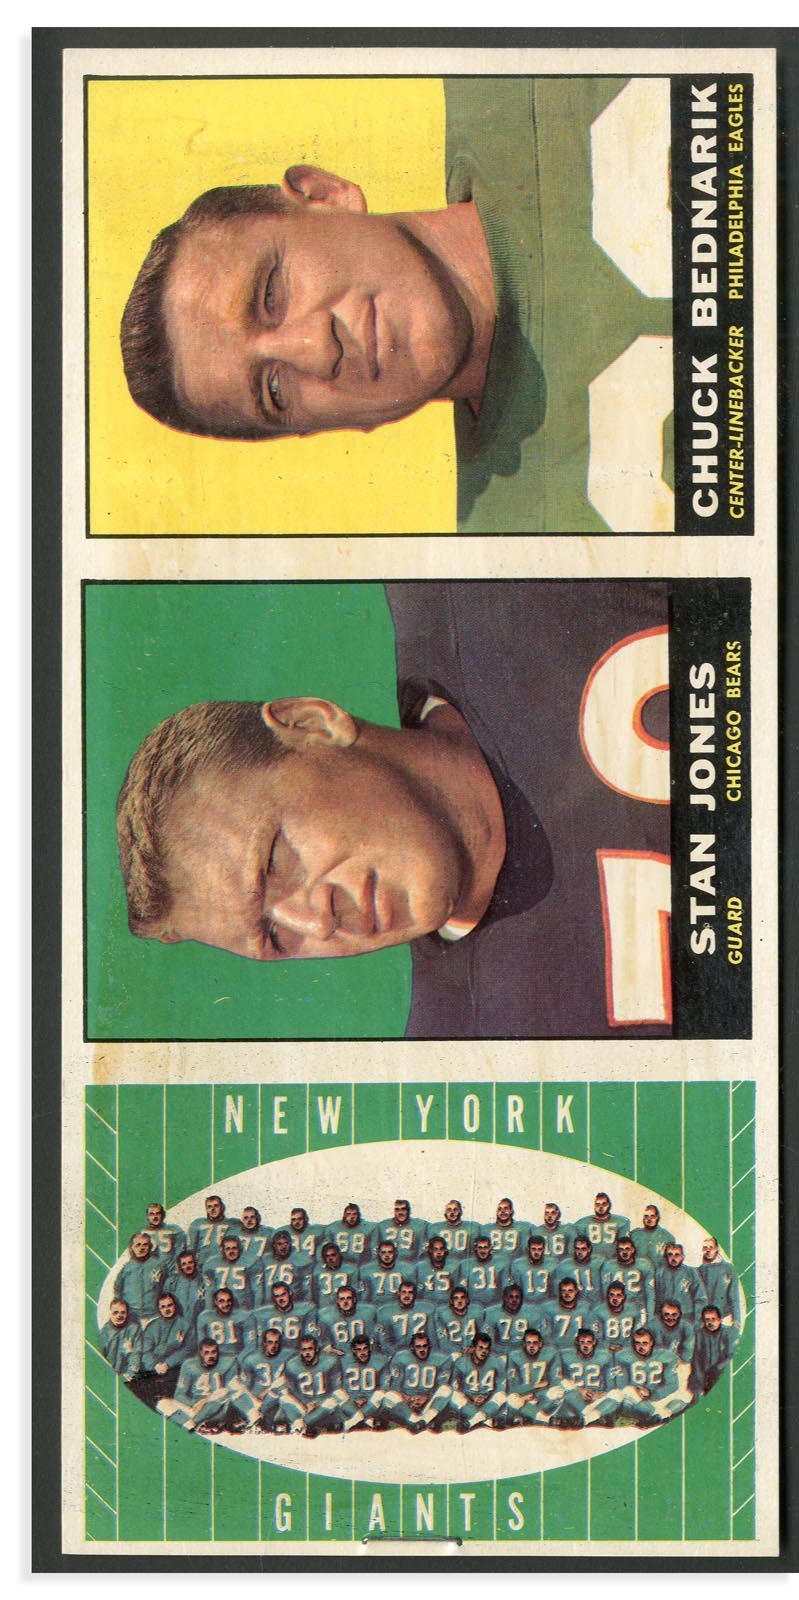 1961 Topps Football "Tryptch" Advertising Card from Fleer Archive